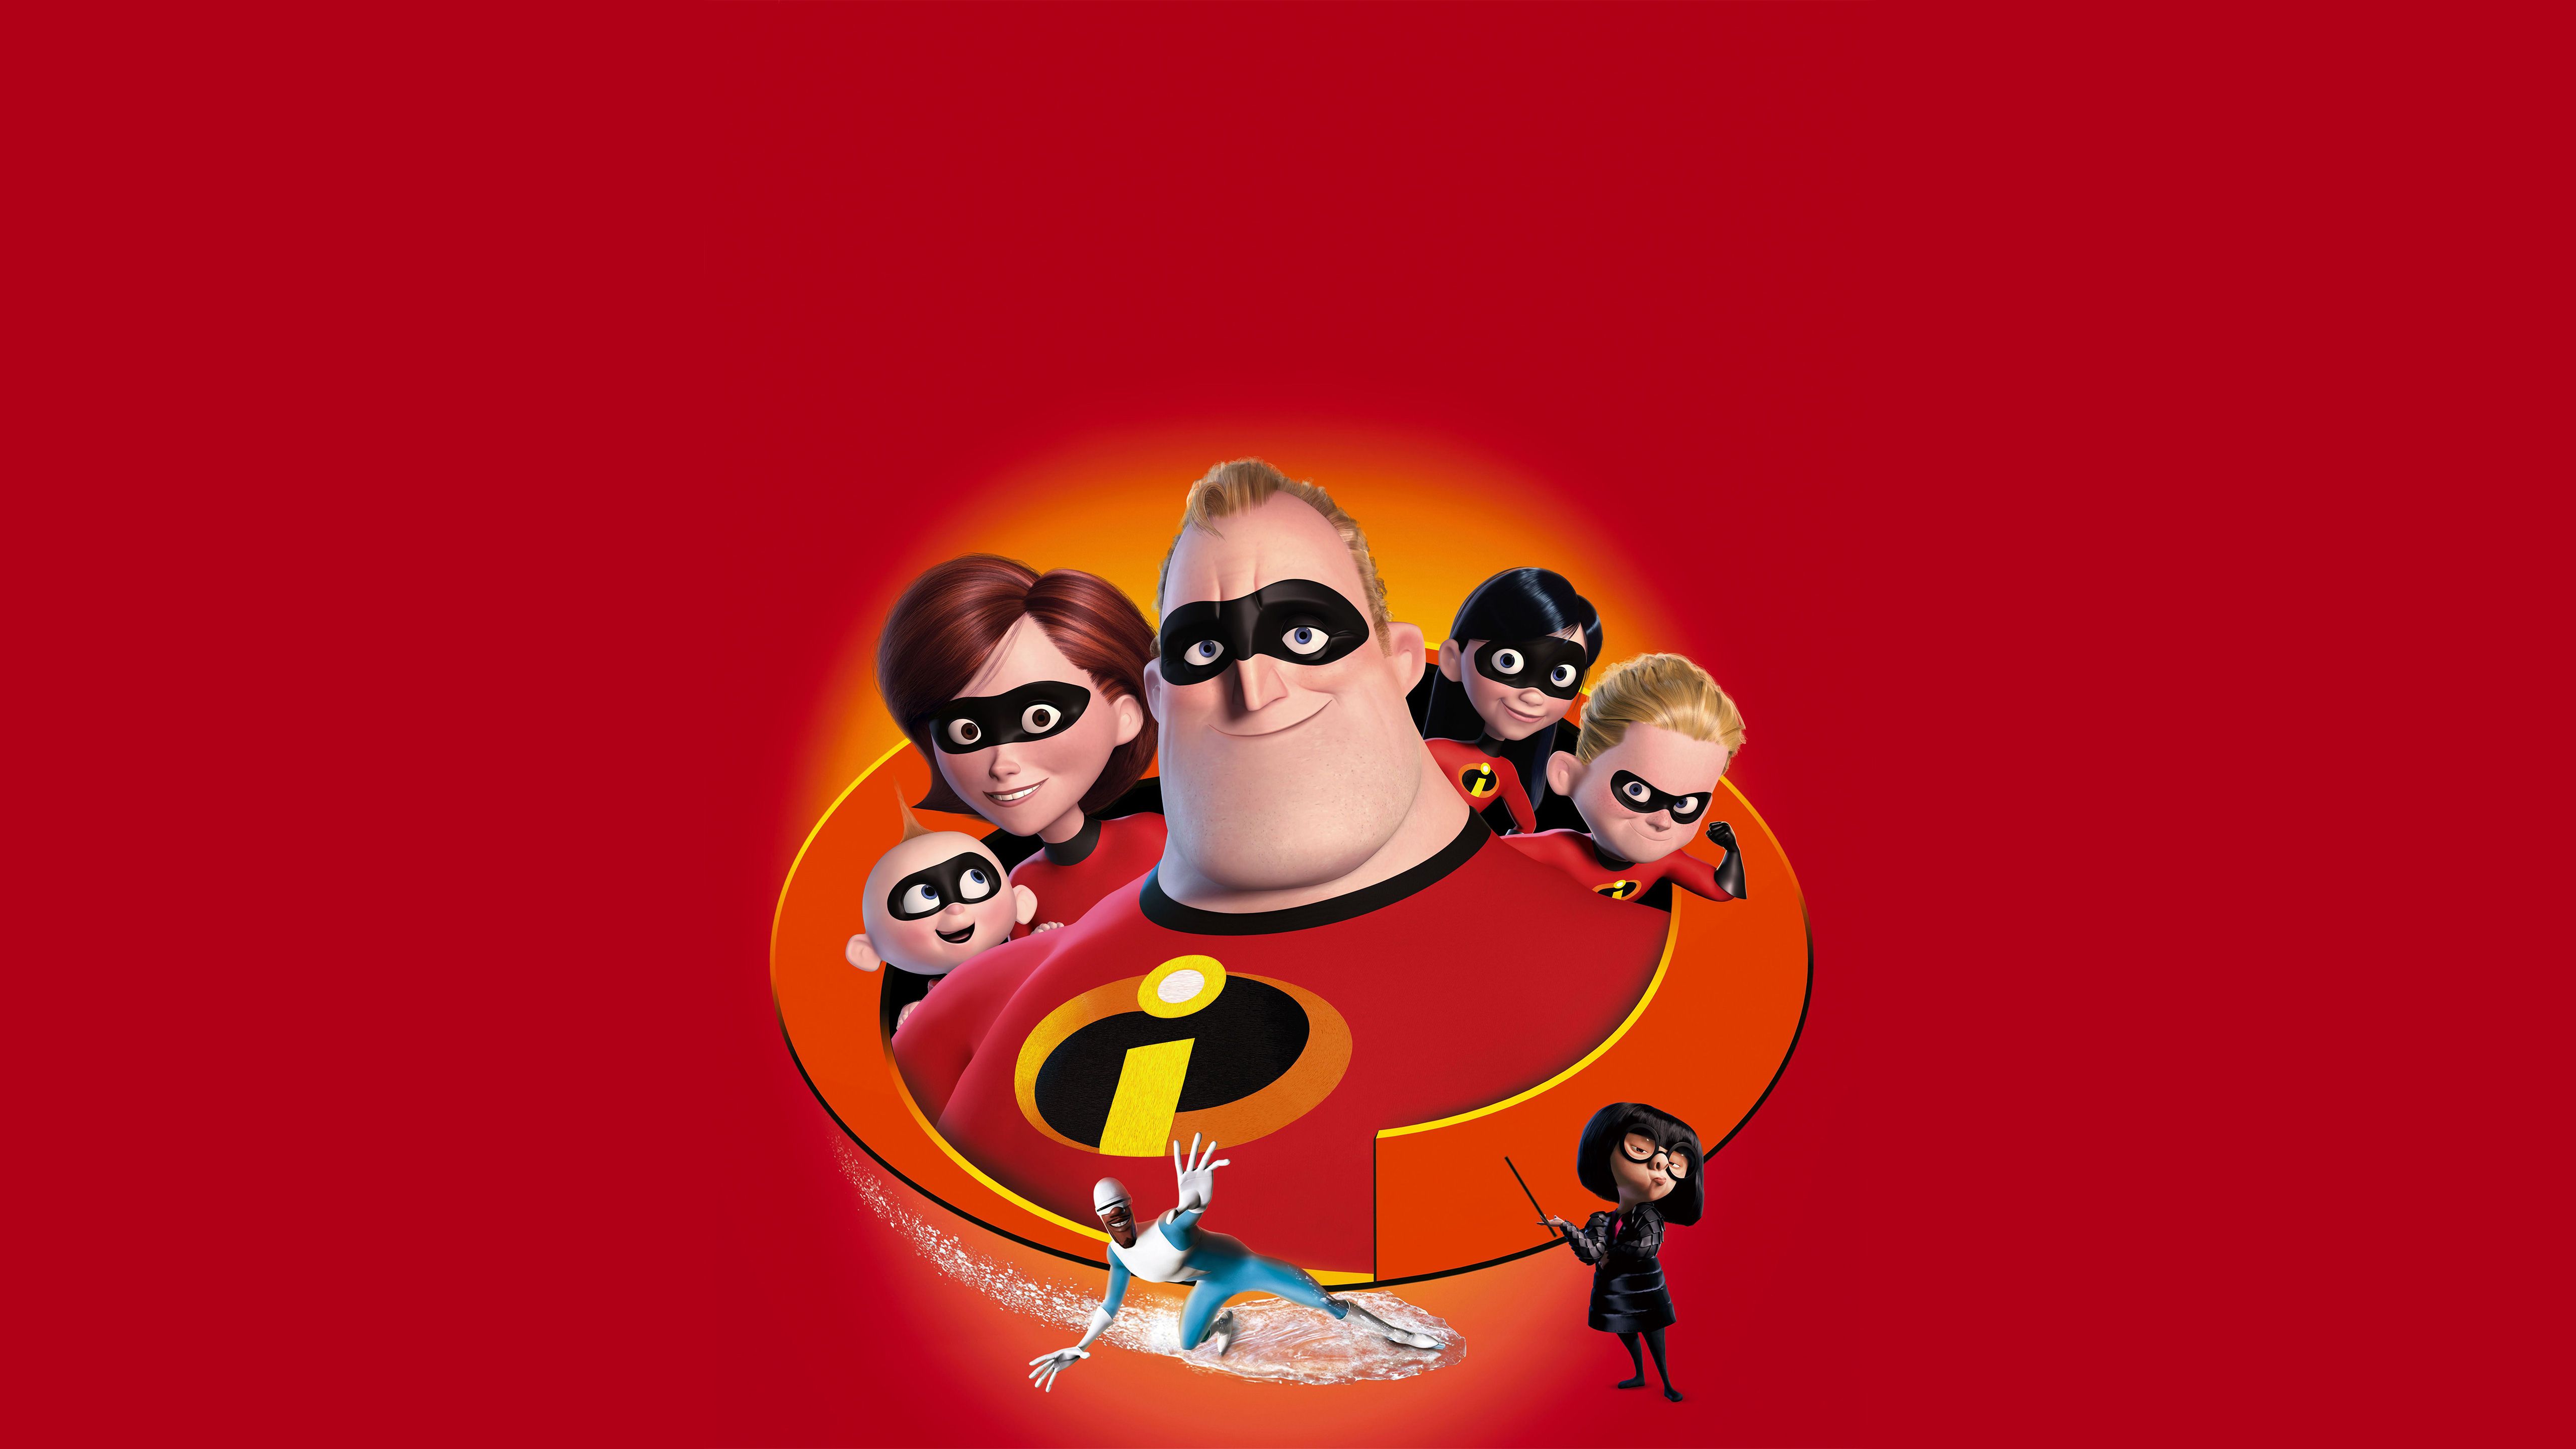 5120x2880 The Incredibles 5k Retina Ultra Hd Wallpaper Background Image 5120x2880